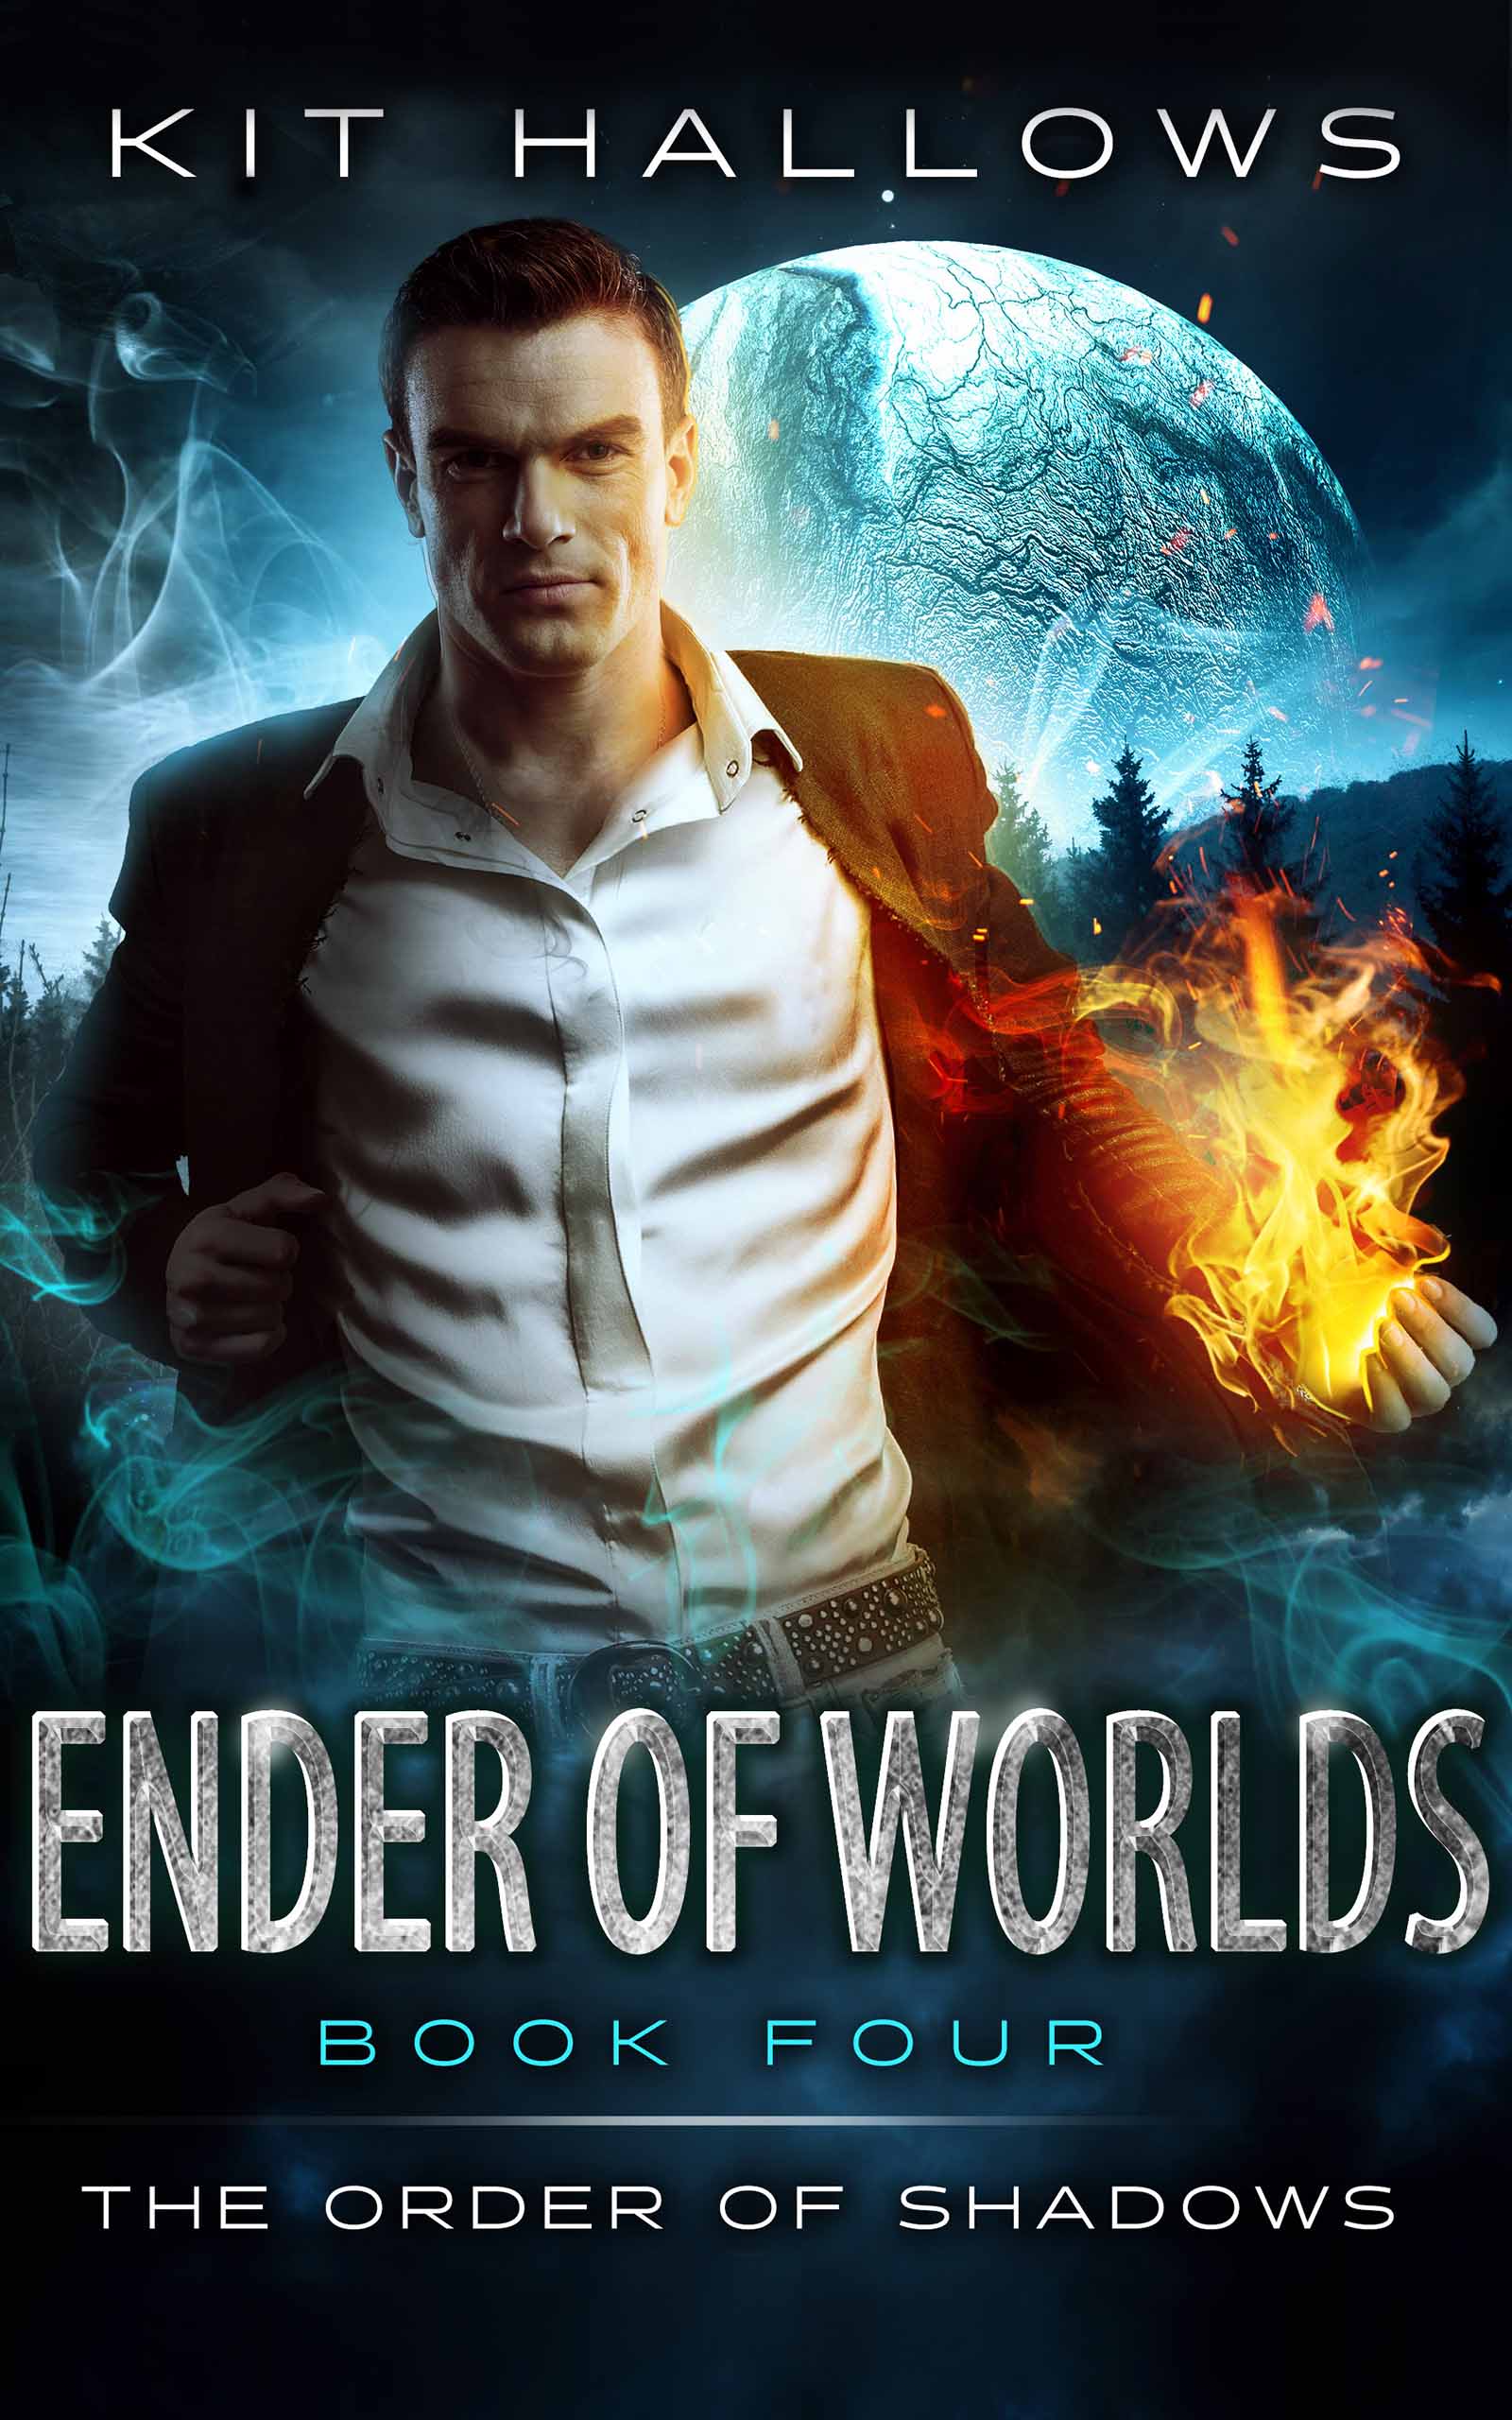 Ender of Worlds by Kit Hallows